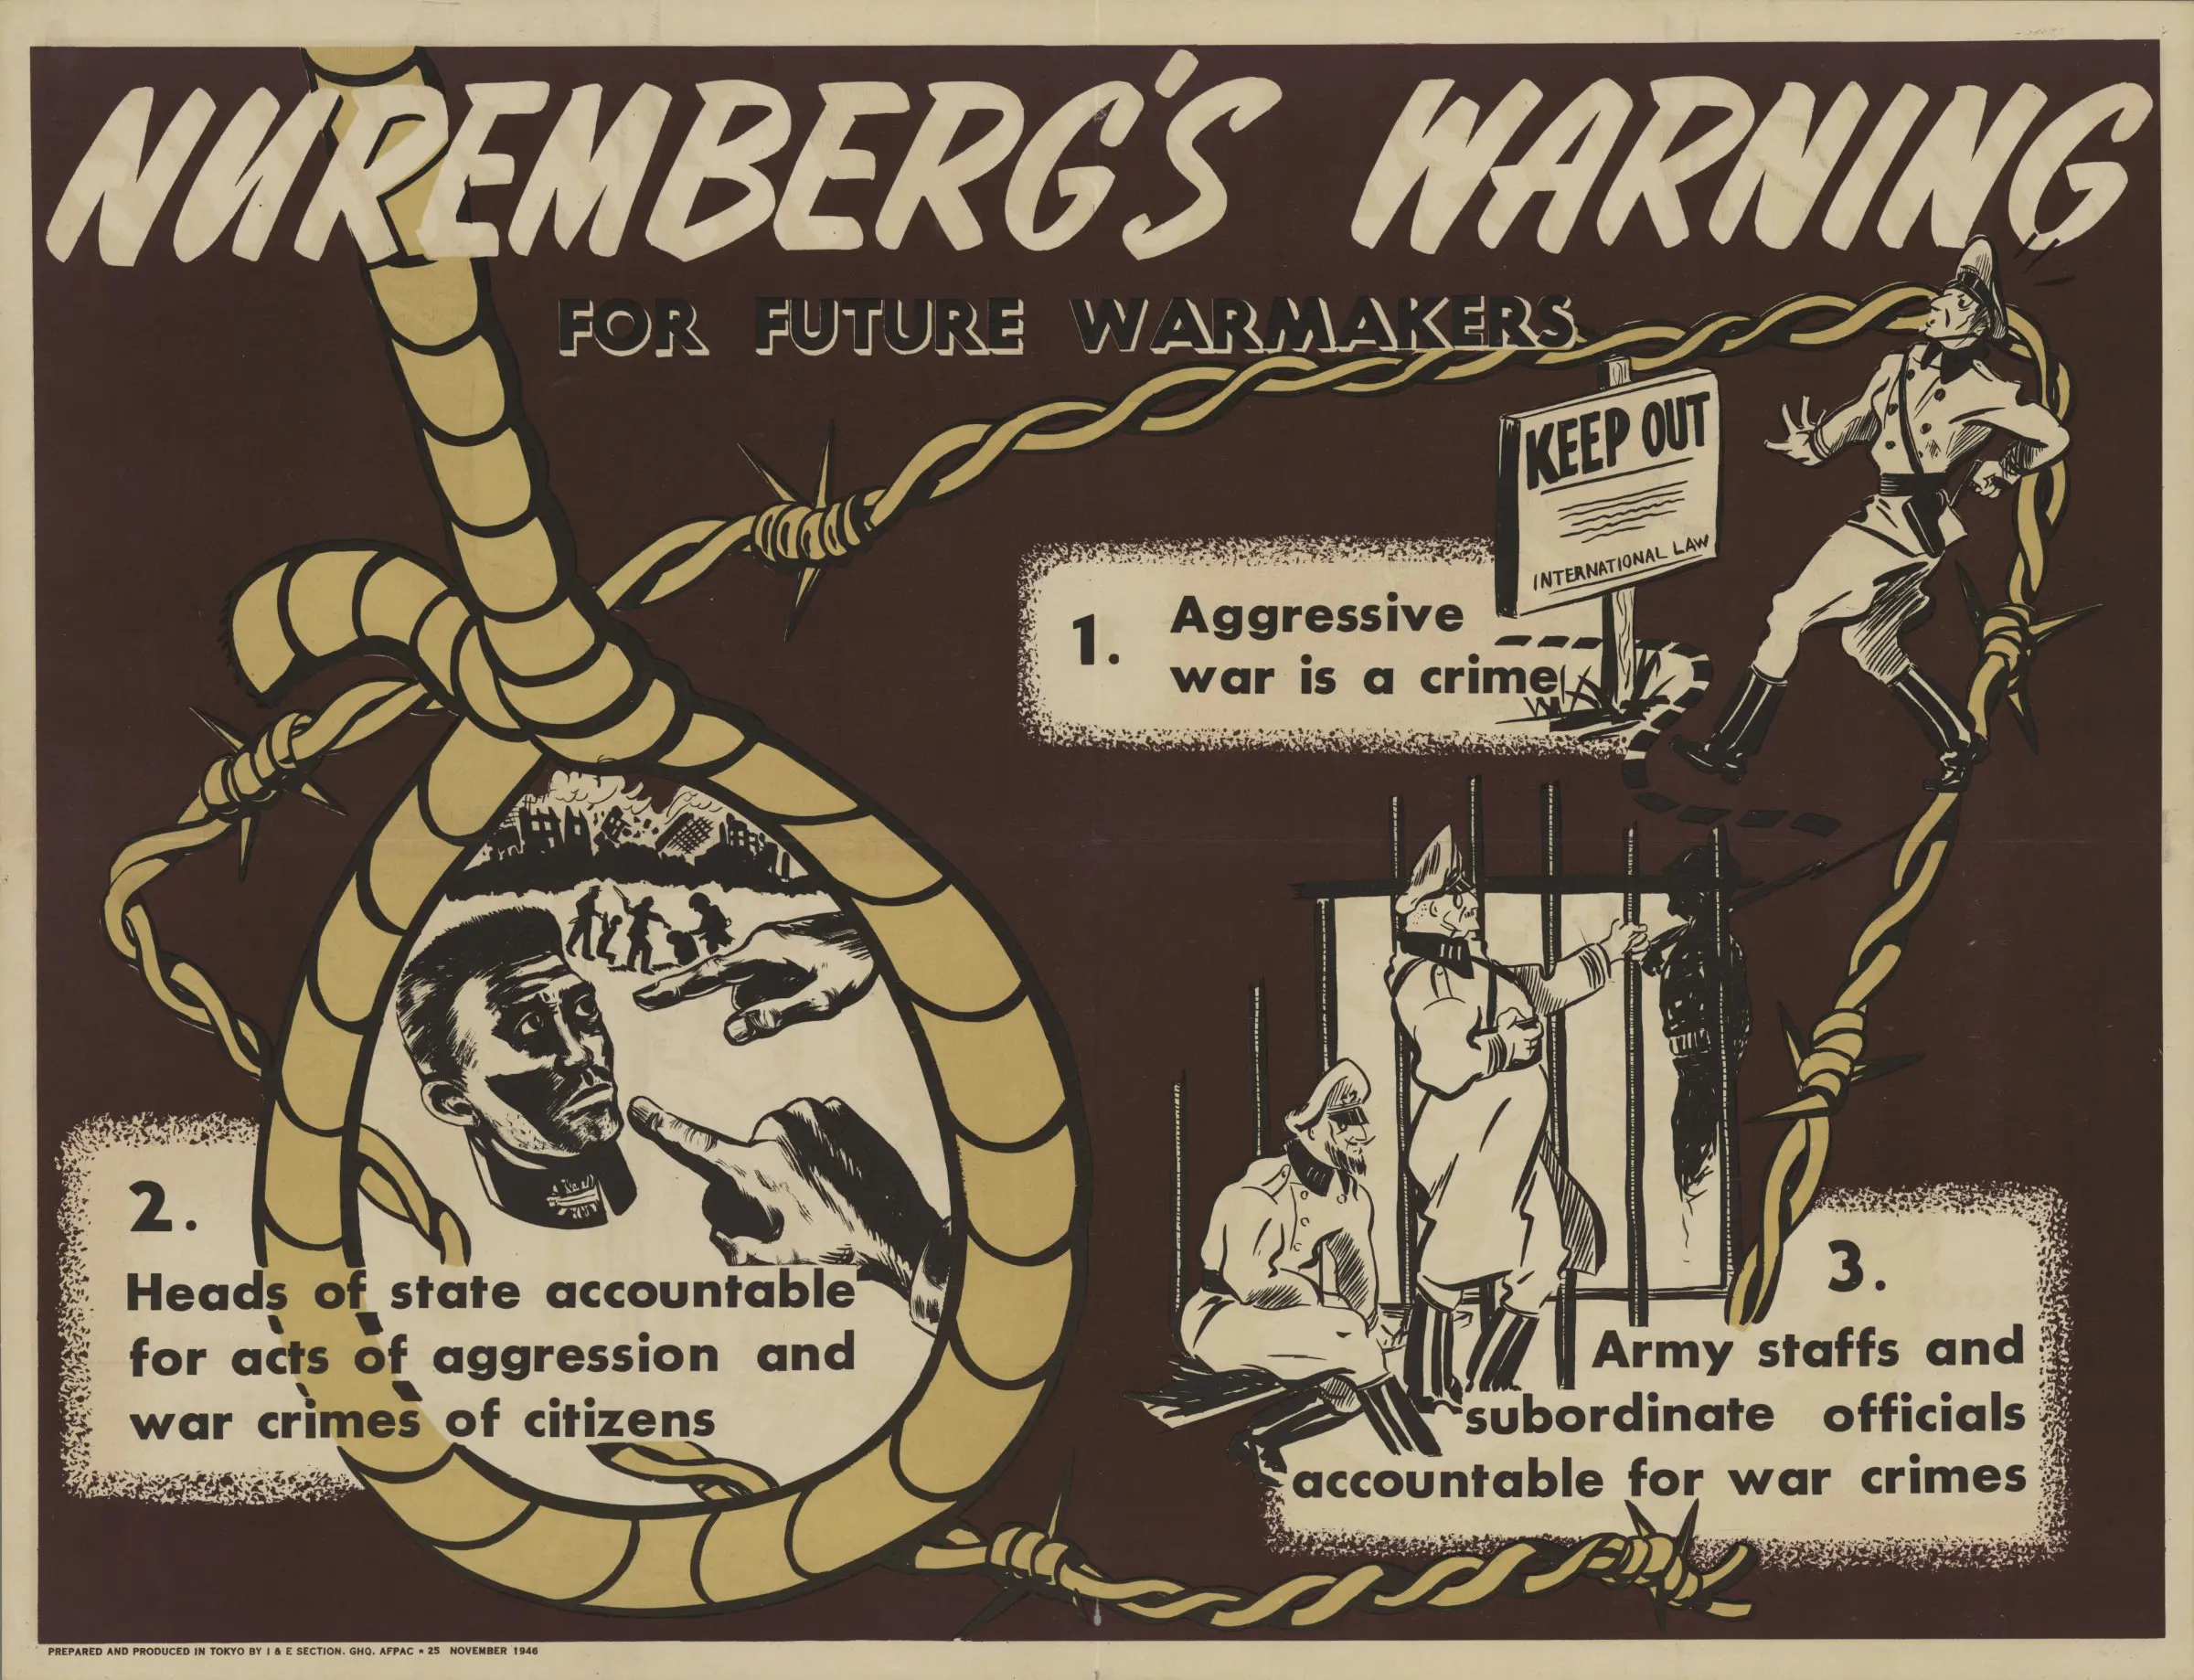 Nuremberg's Warning, prepared and produced in Tokyo by I & E Section, GHQ, AFPAC, 25 November 1946.